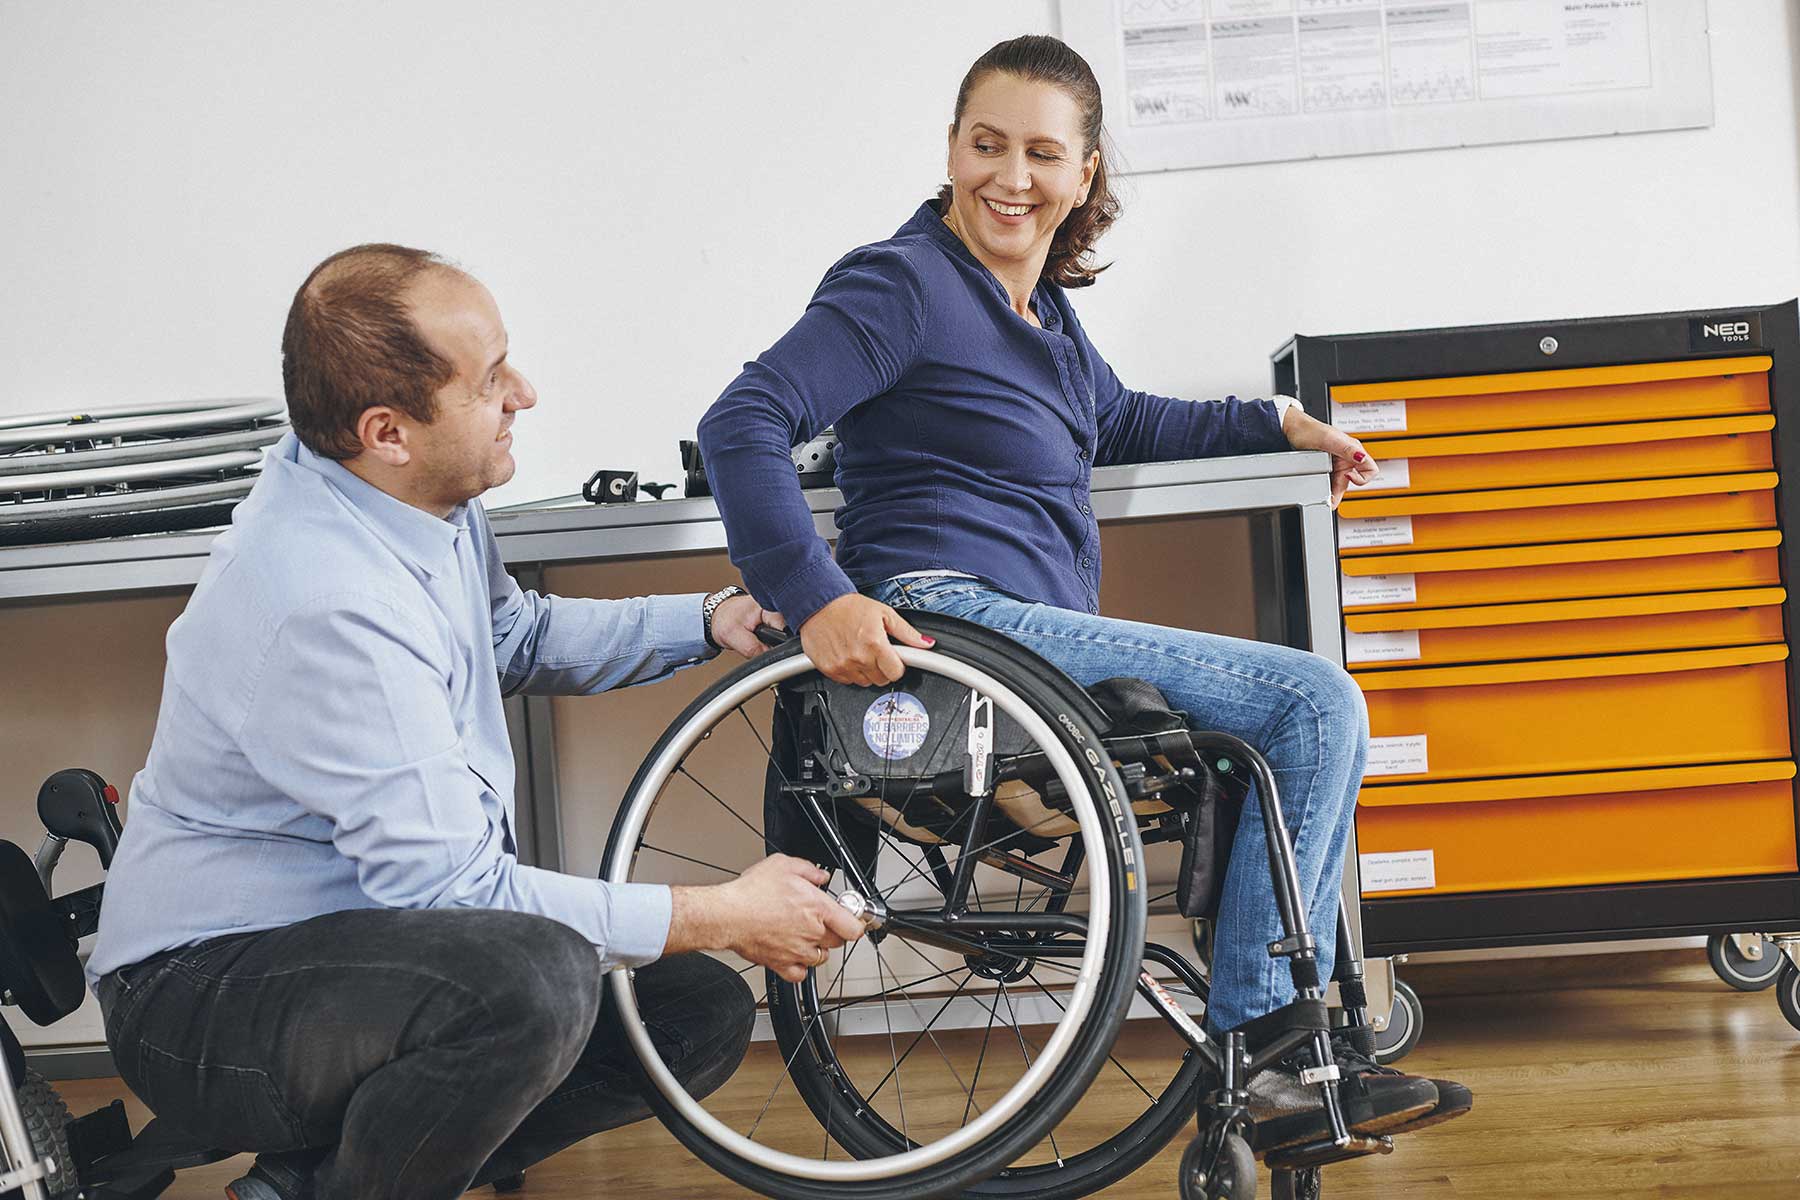 MBL - product development with wheelchair users. A wheelchair user with R&D engineer